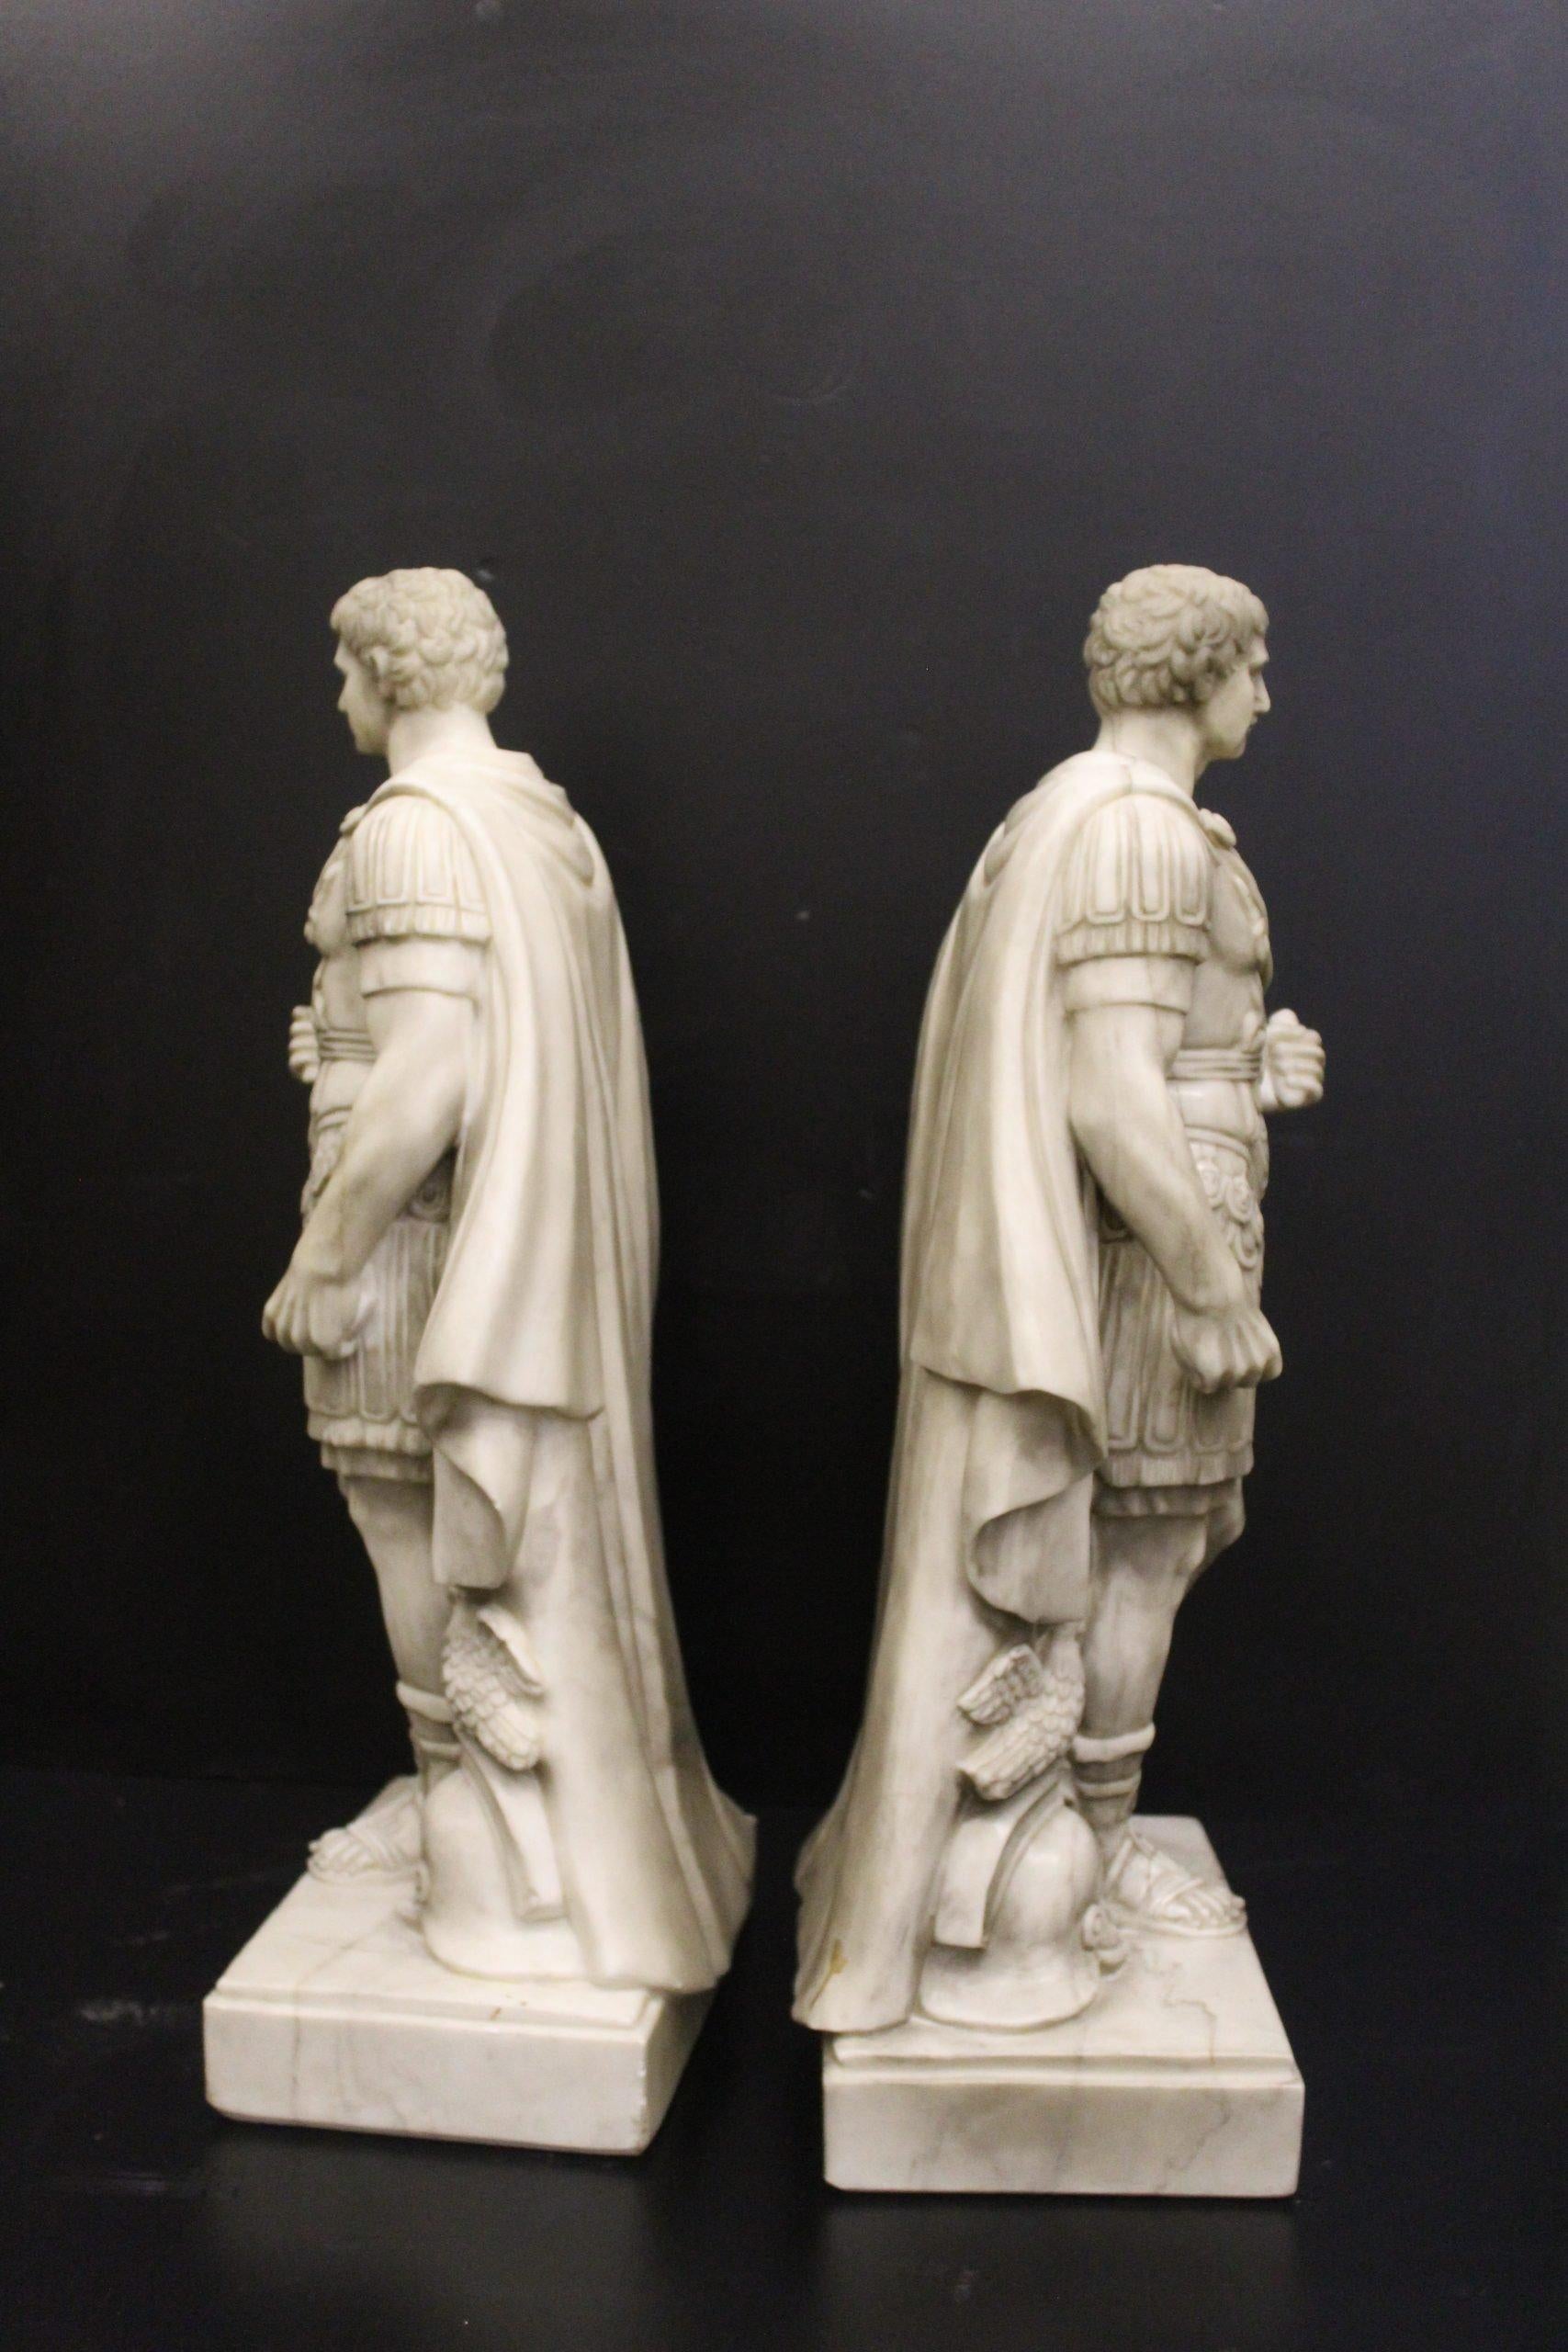 Description
Refined pair of marble sculptures of Roman gladiators. ADDITIONAL PHOTOS, INFORMATION OF THE LOT AND SHIPPING INFORMATION CAN BE REQUEST BY SENDING AN EMAIL.
Tags: Coppia di sculture in marmo di gladiatori romani. Pareja de esculturas de